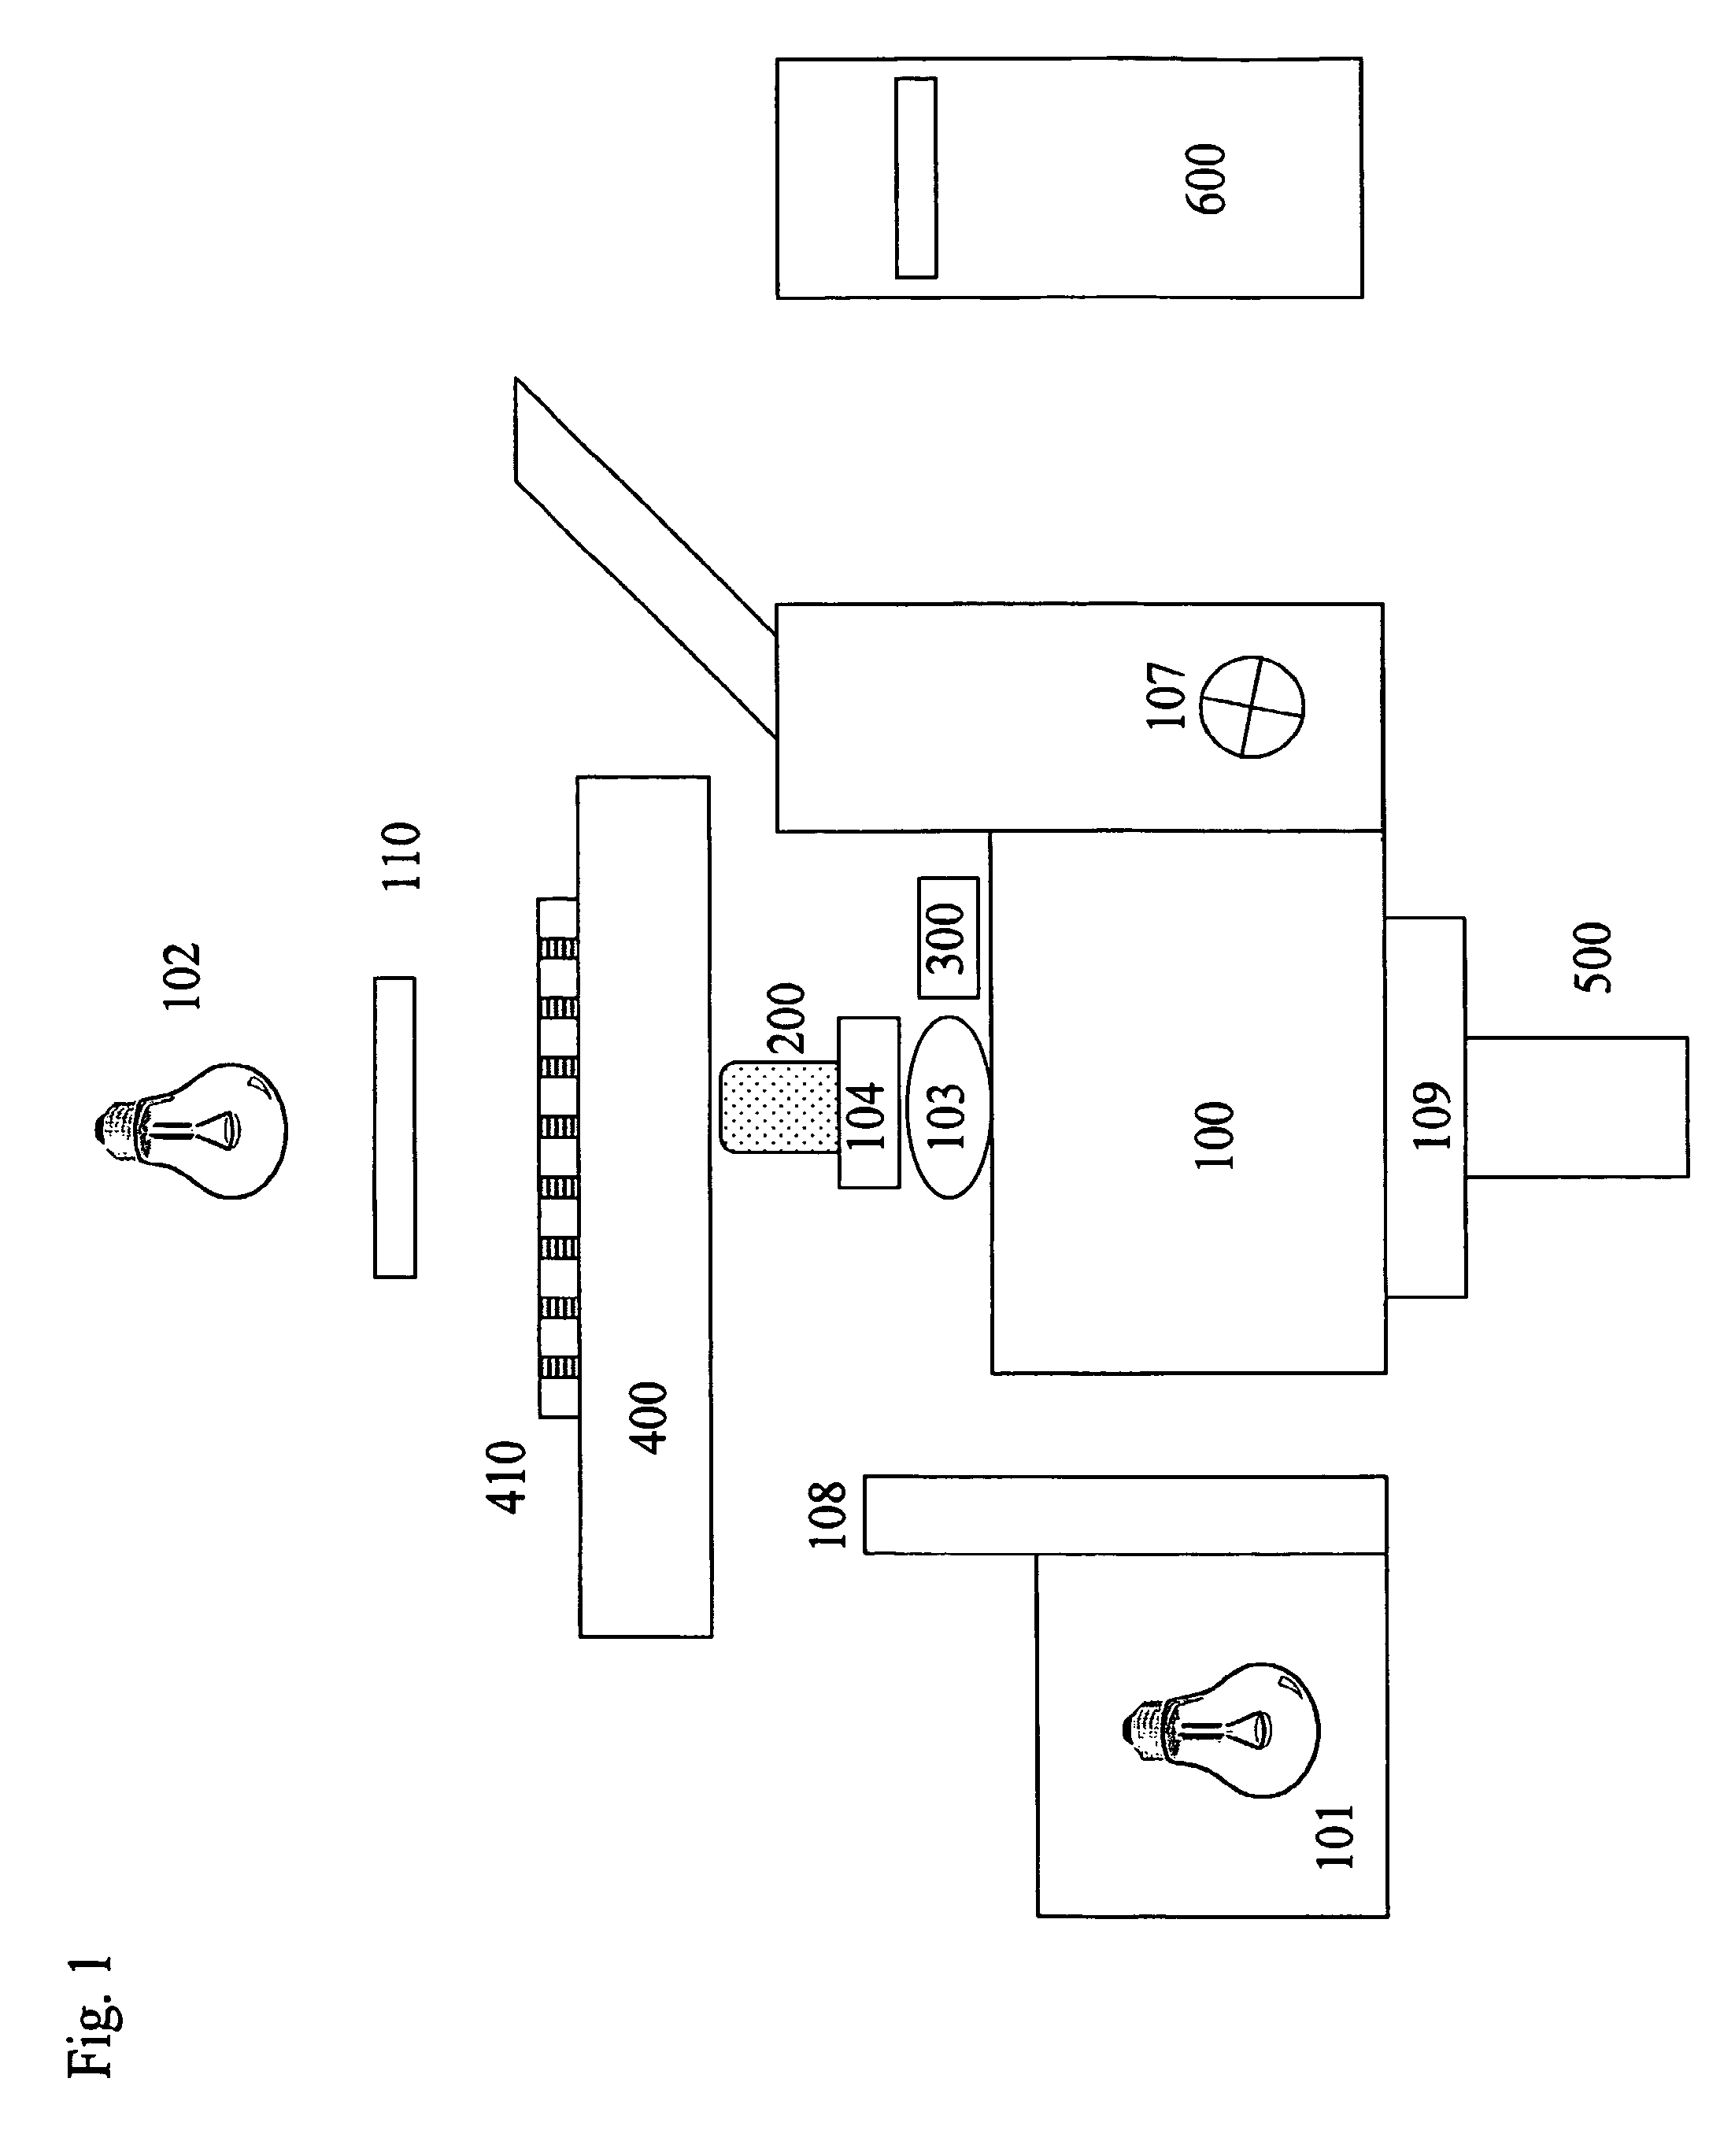 System and methods for rapid and automated screening of cells